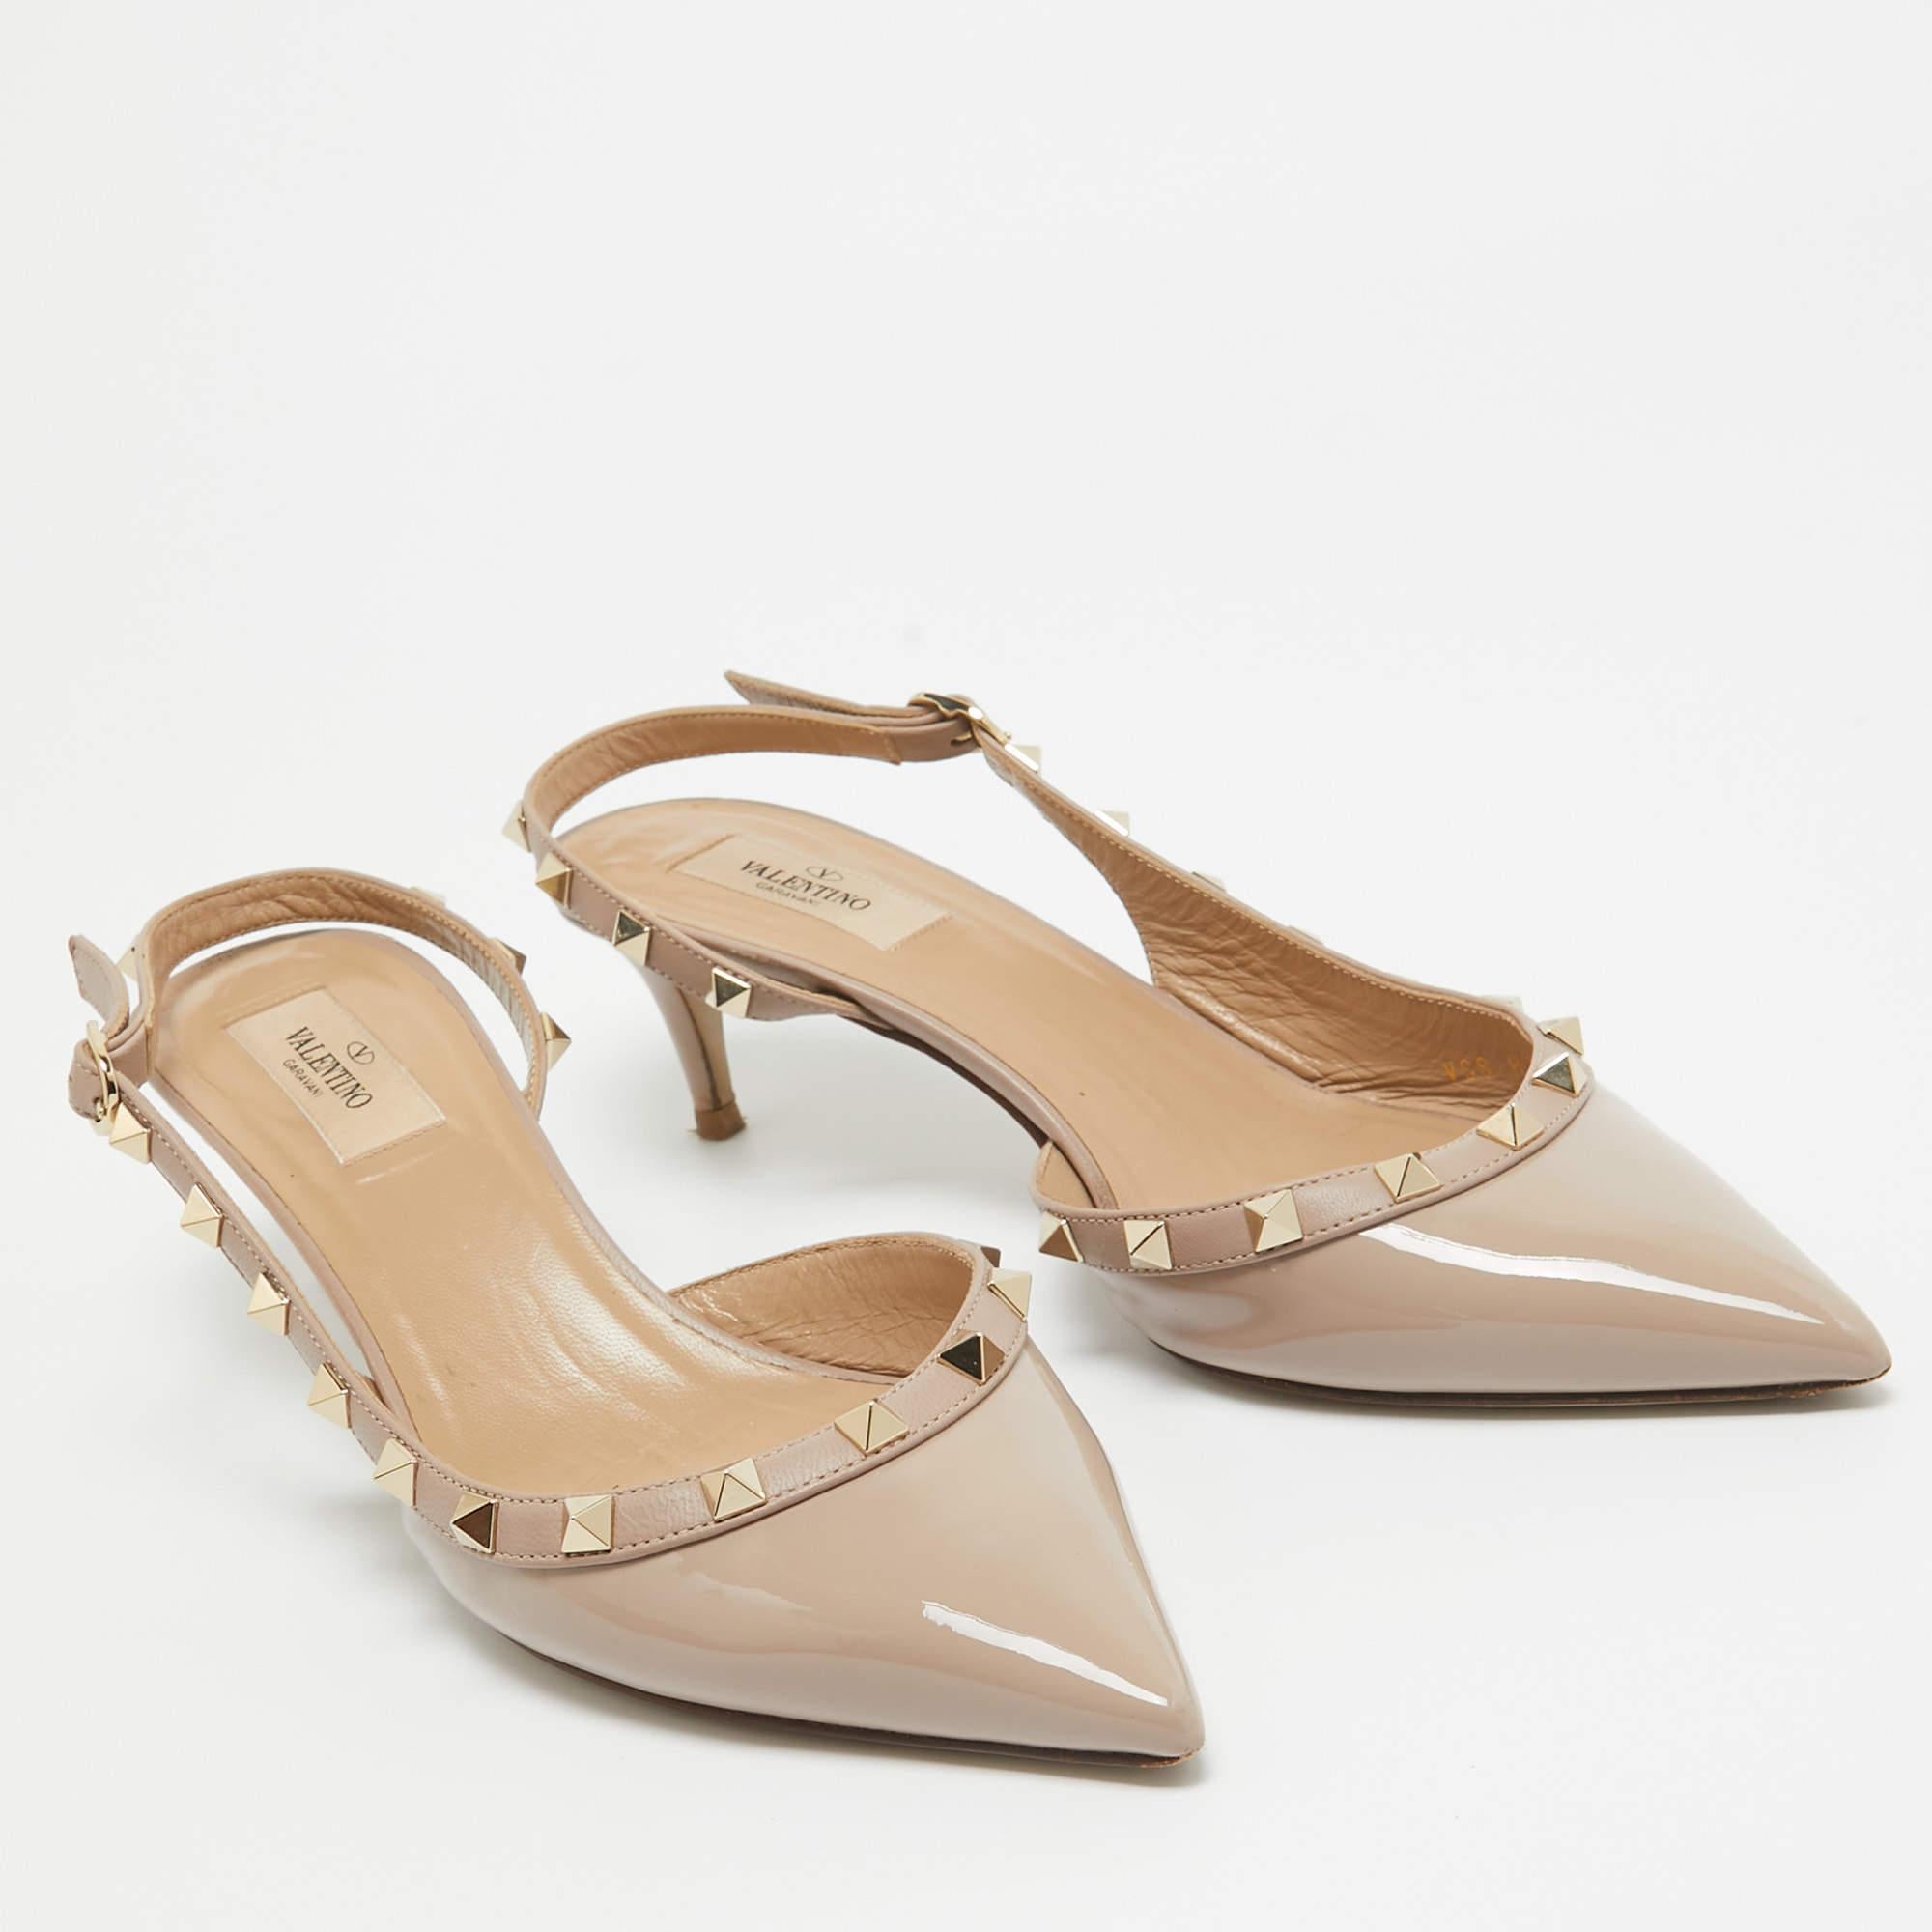 Valentino Beige Patent and Leather Rockstud Slingback Pumps Size 40 In Good Condition For Sale In Dubai, Al Qouz 2